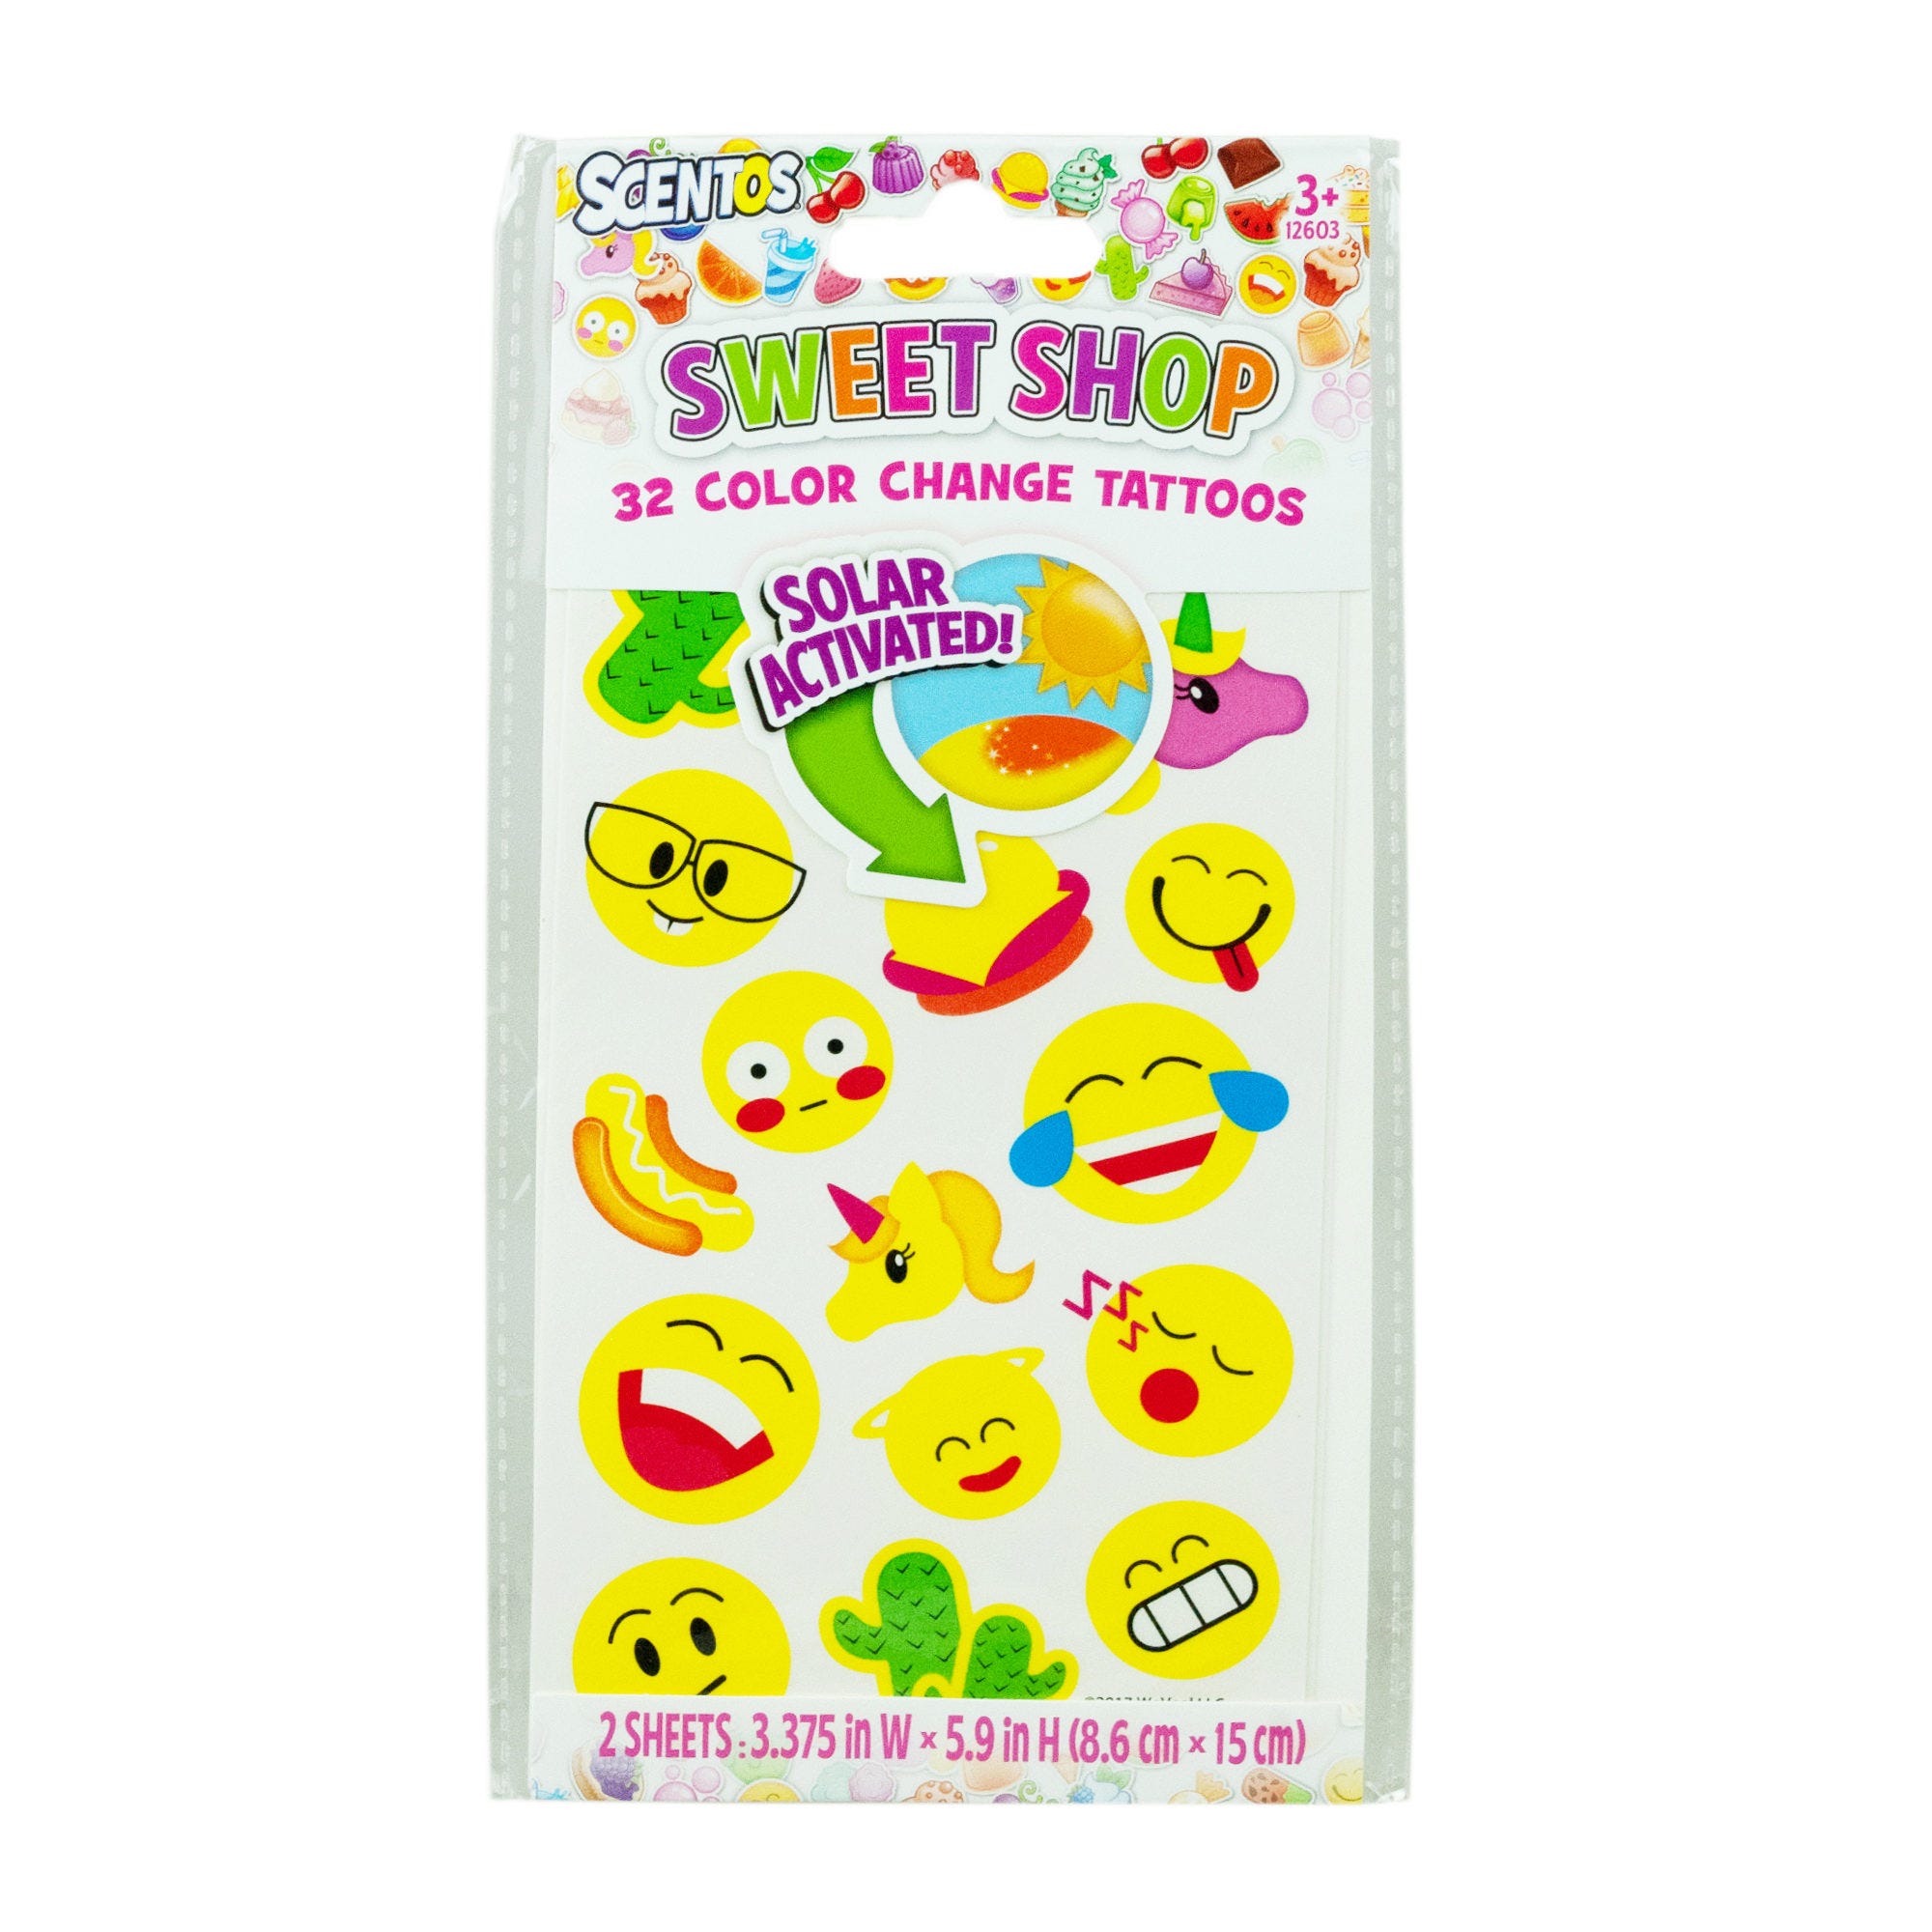 Scentos Sweet Shop Color Change TATTOOs - Qty 72